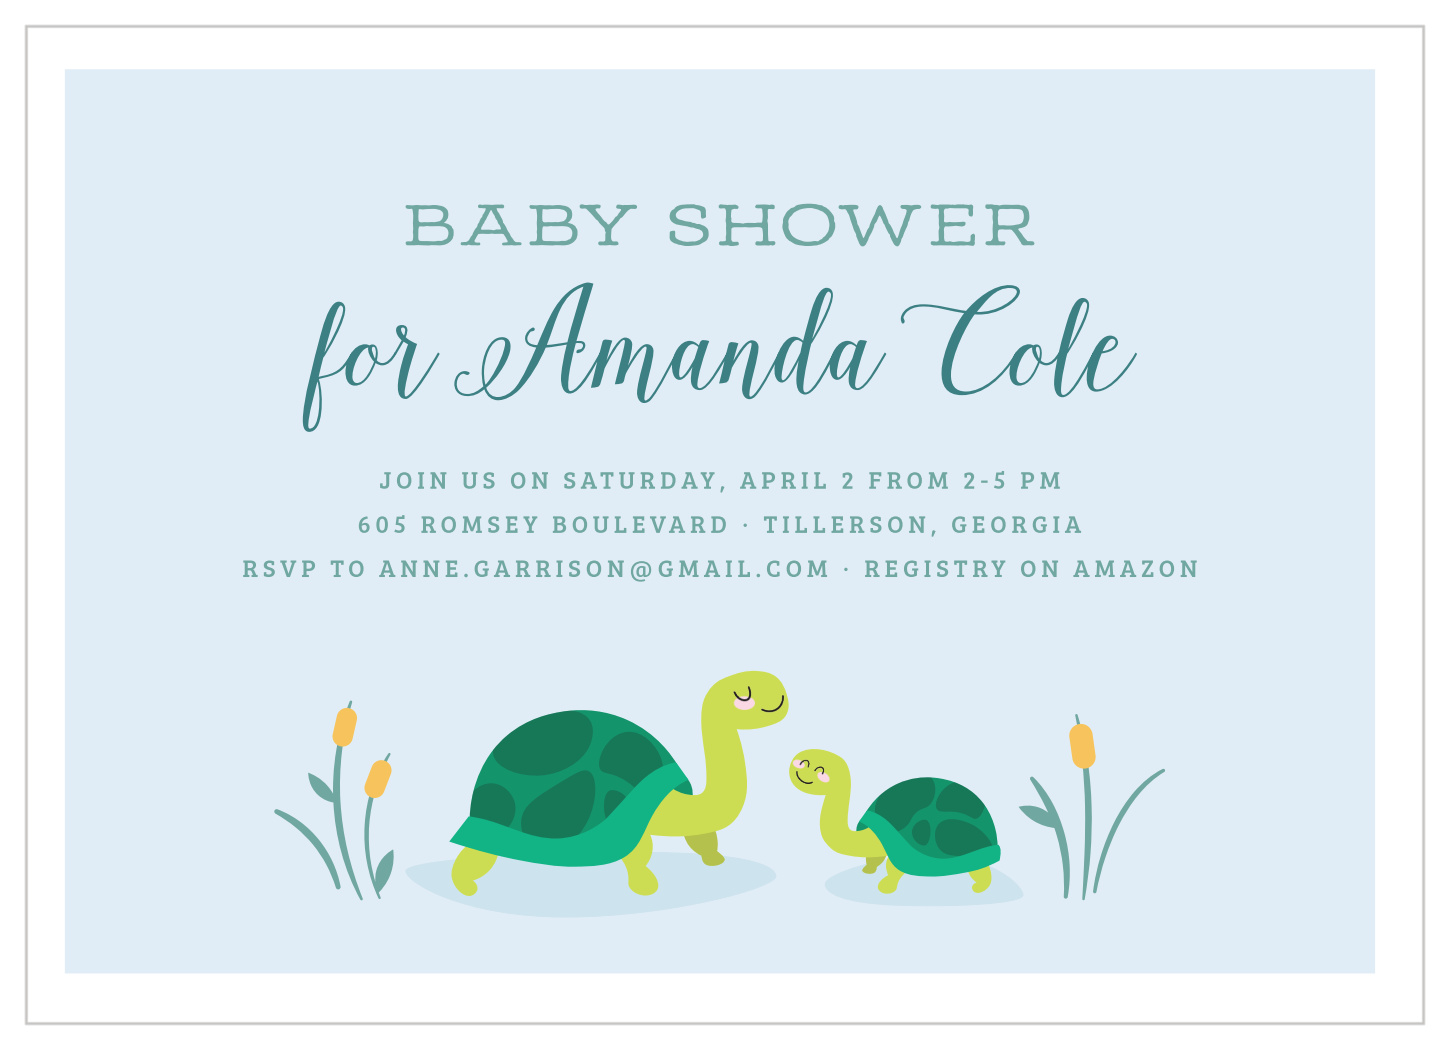 Marching Turtles Baby Shower Invitations